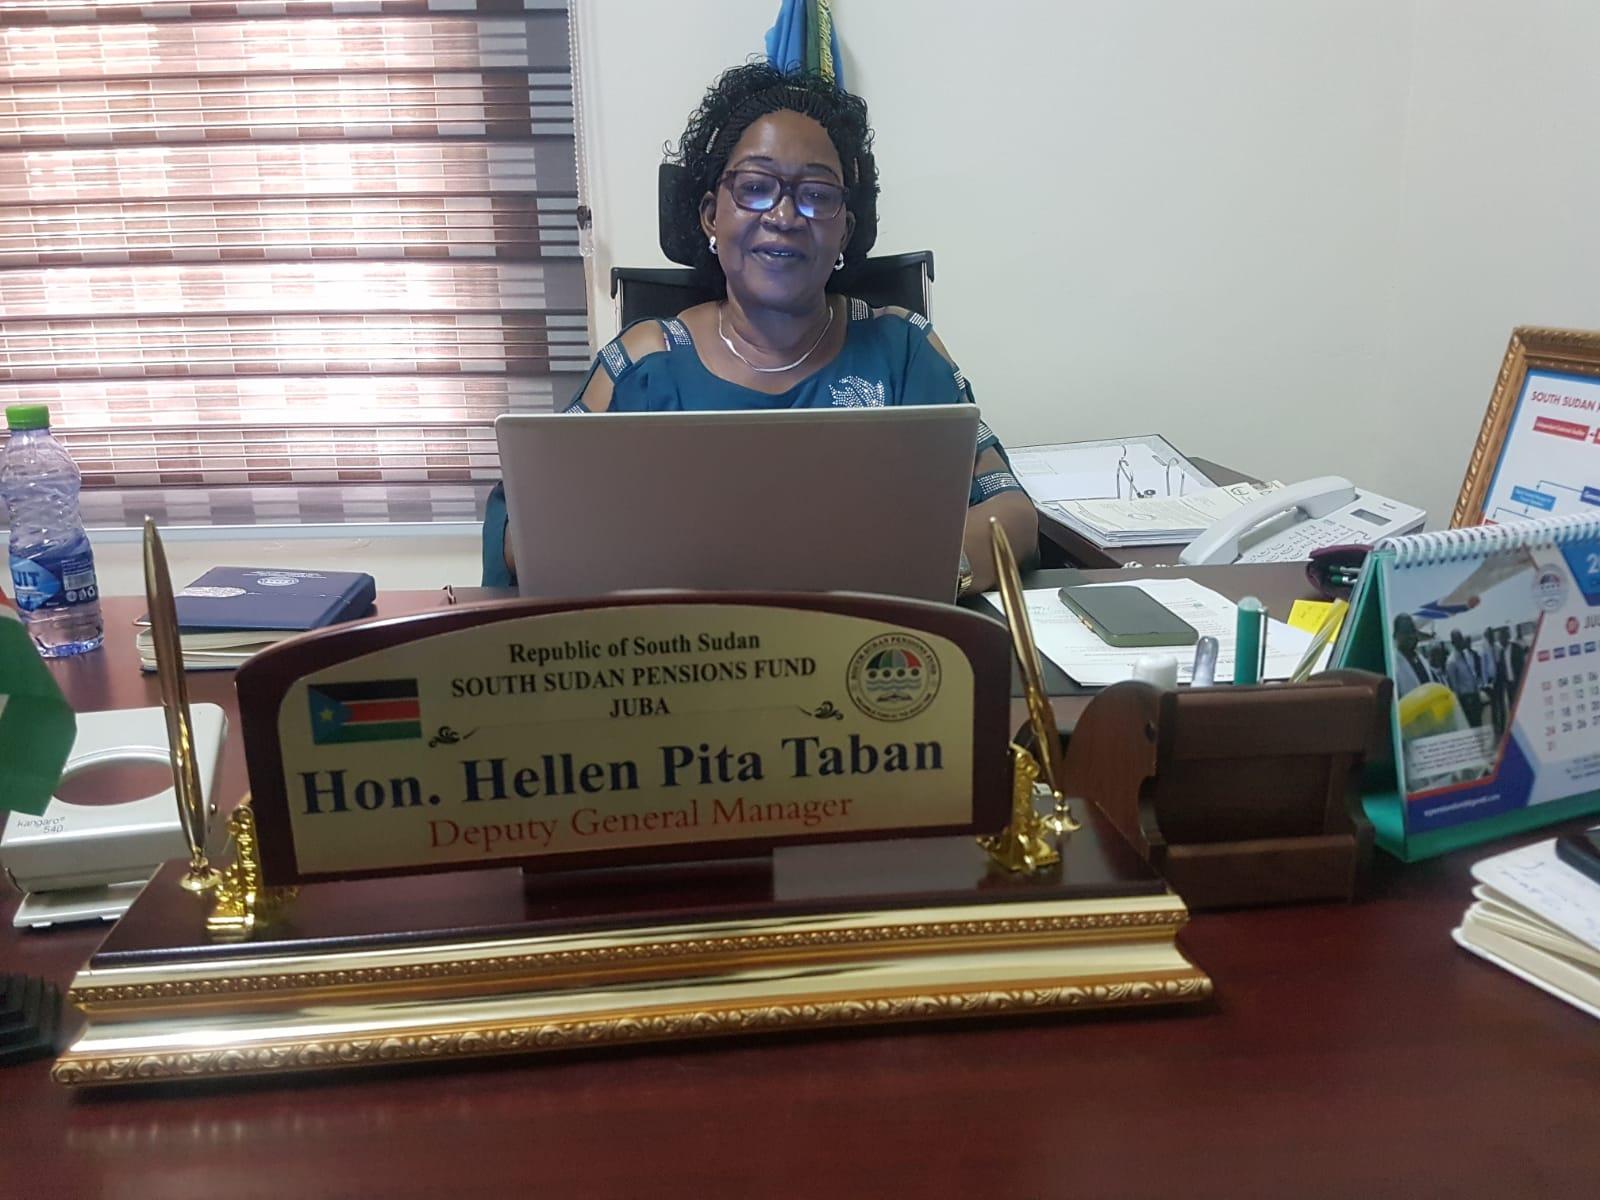 Hellen Taban, the iron lady at the helm of South Sudan Pensions Fund